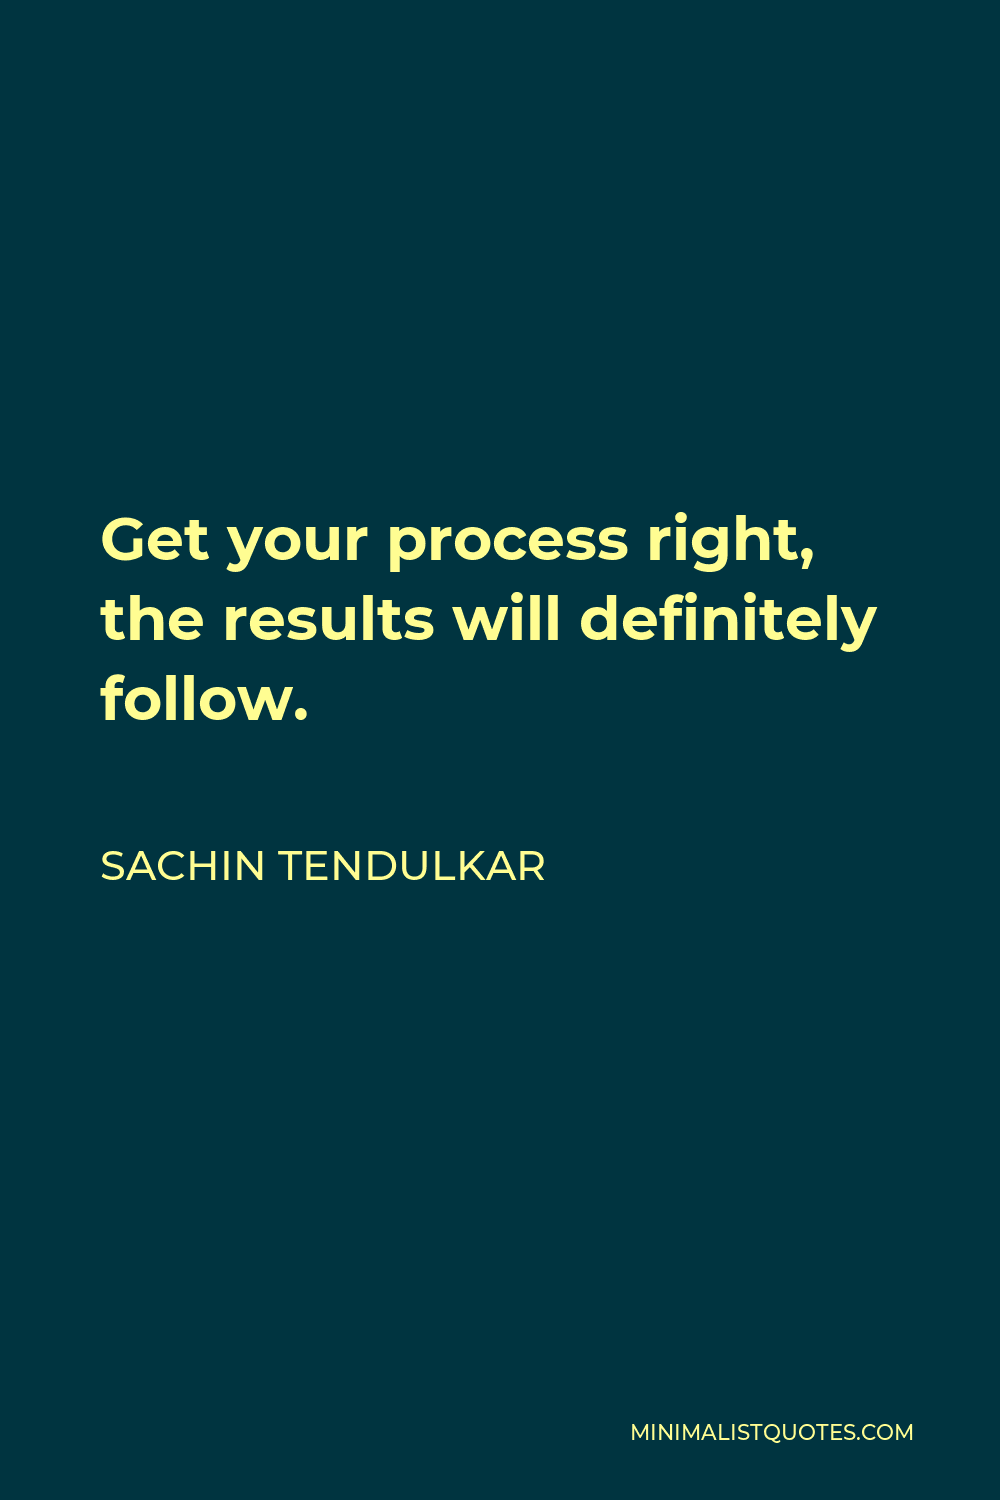 Sachin Tendulkar Quote - Get your process right, the results will definitely follow.